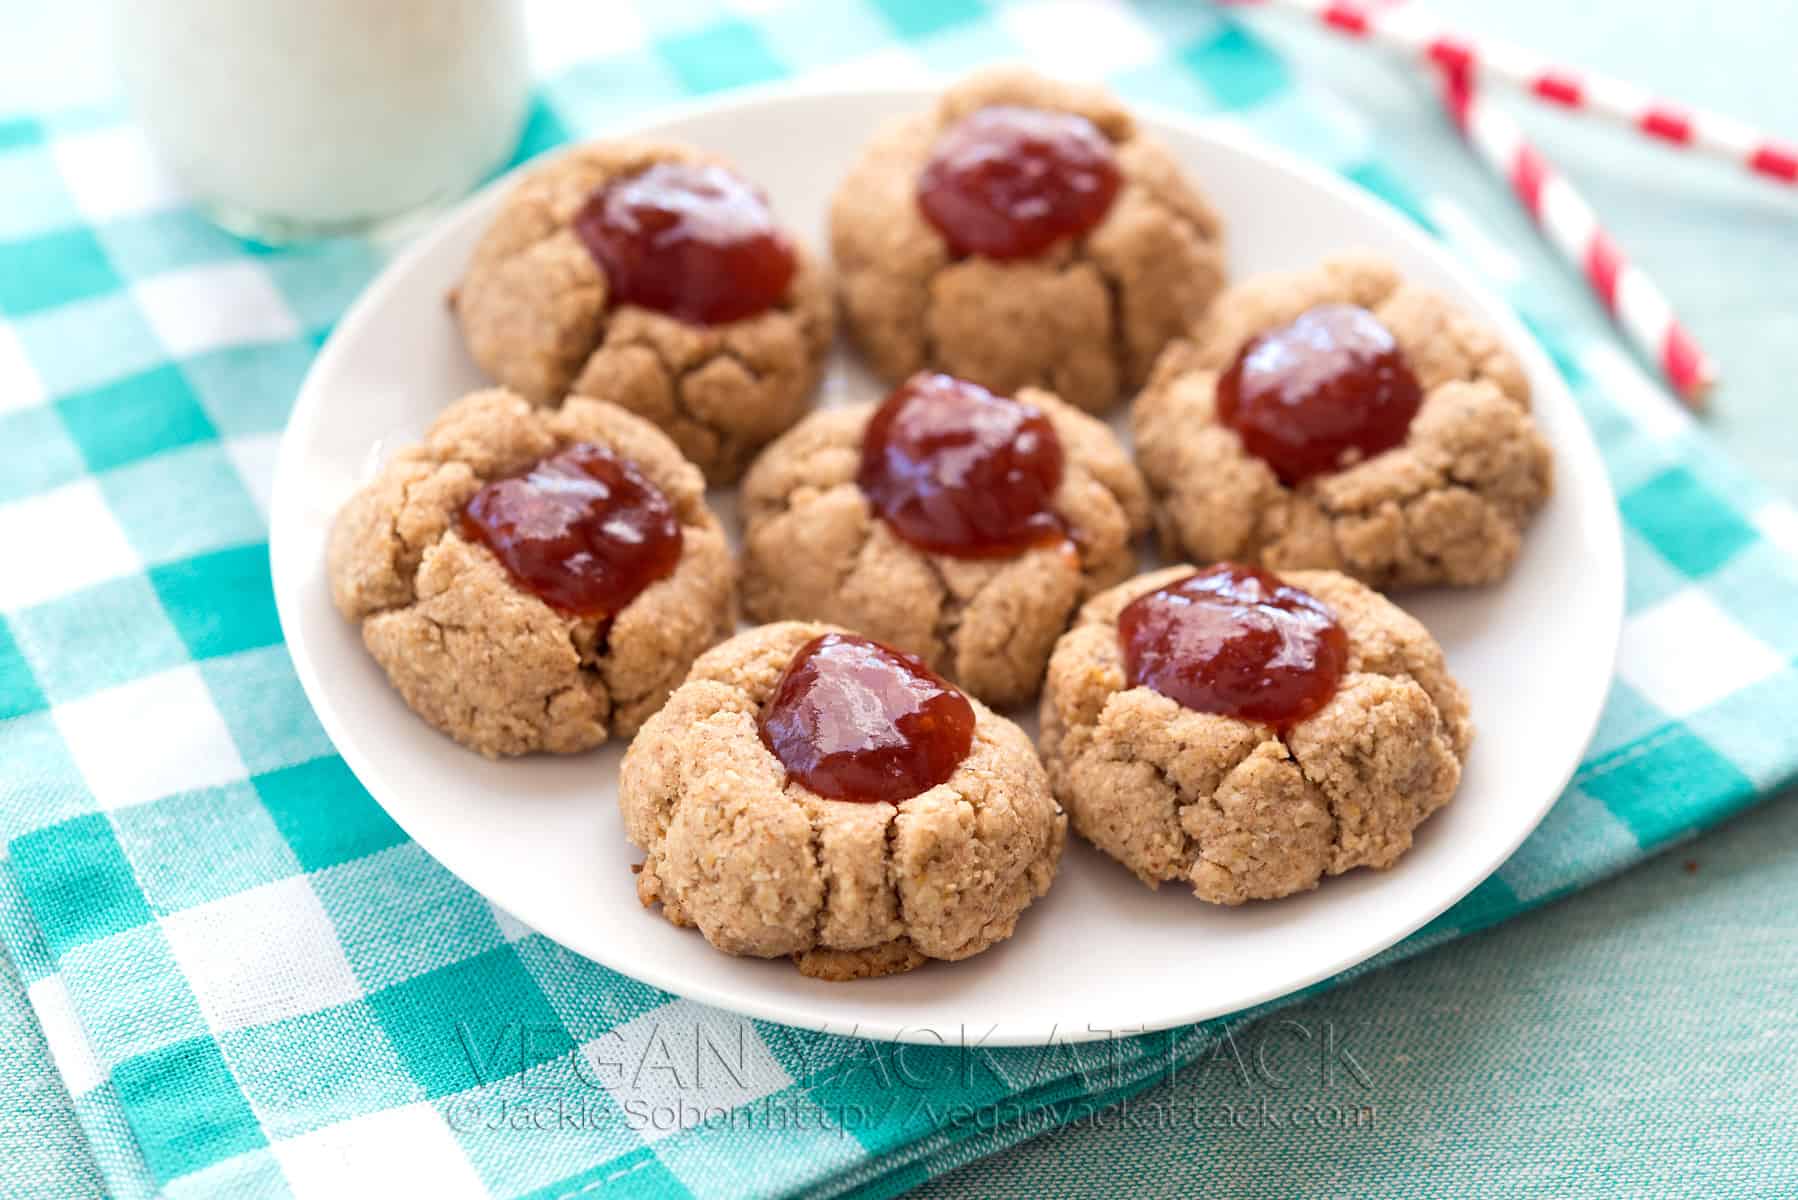 Almond butter jam thumbprint cookies on a white plate on a teal, checkered napkin